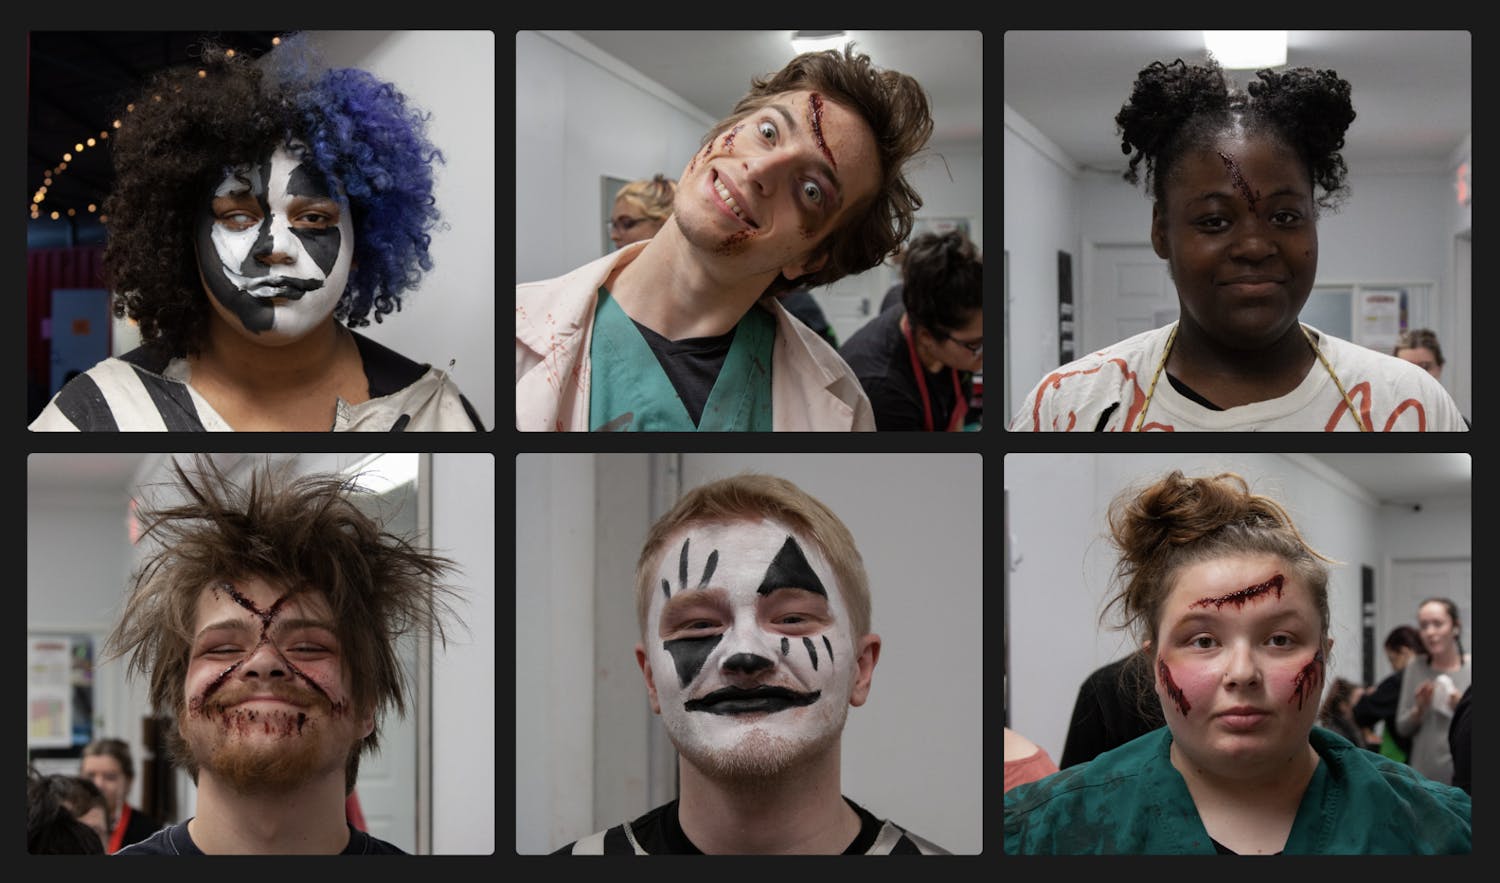 GALLERY: Indy Scream Park makeup feature